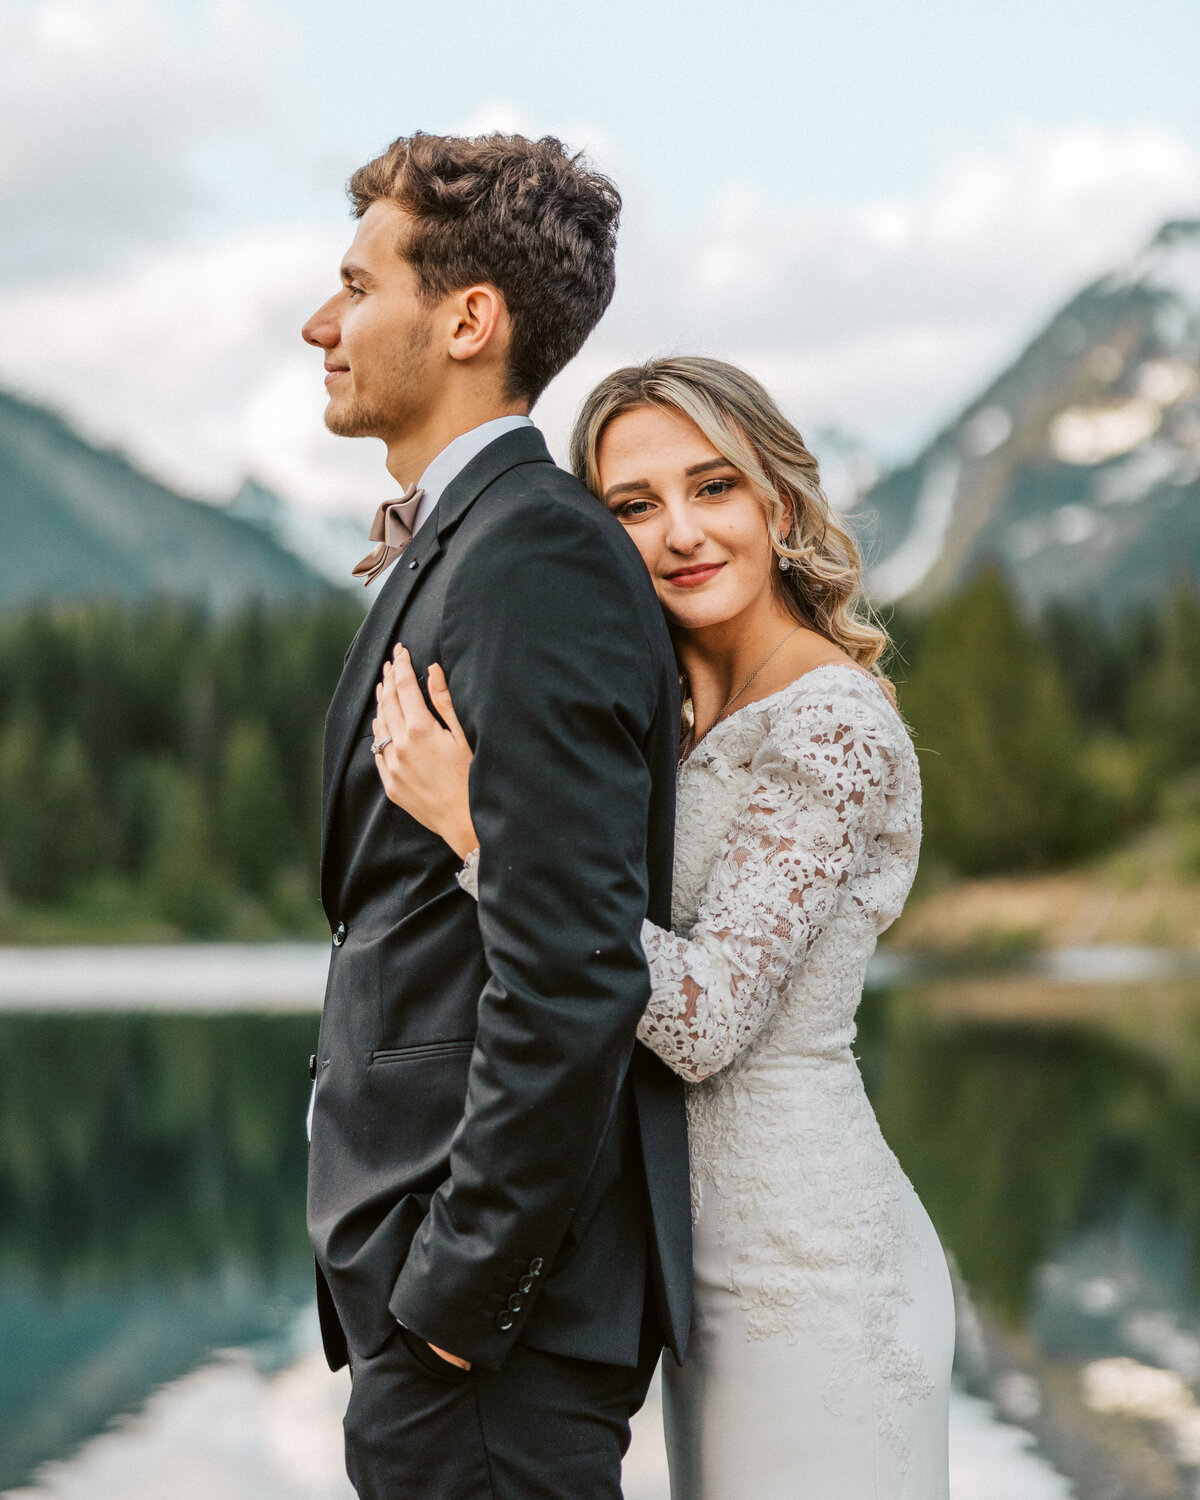 pnw elopement photography poses in gold creek pond in washington state